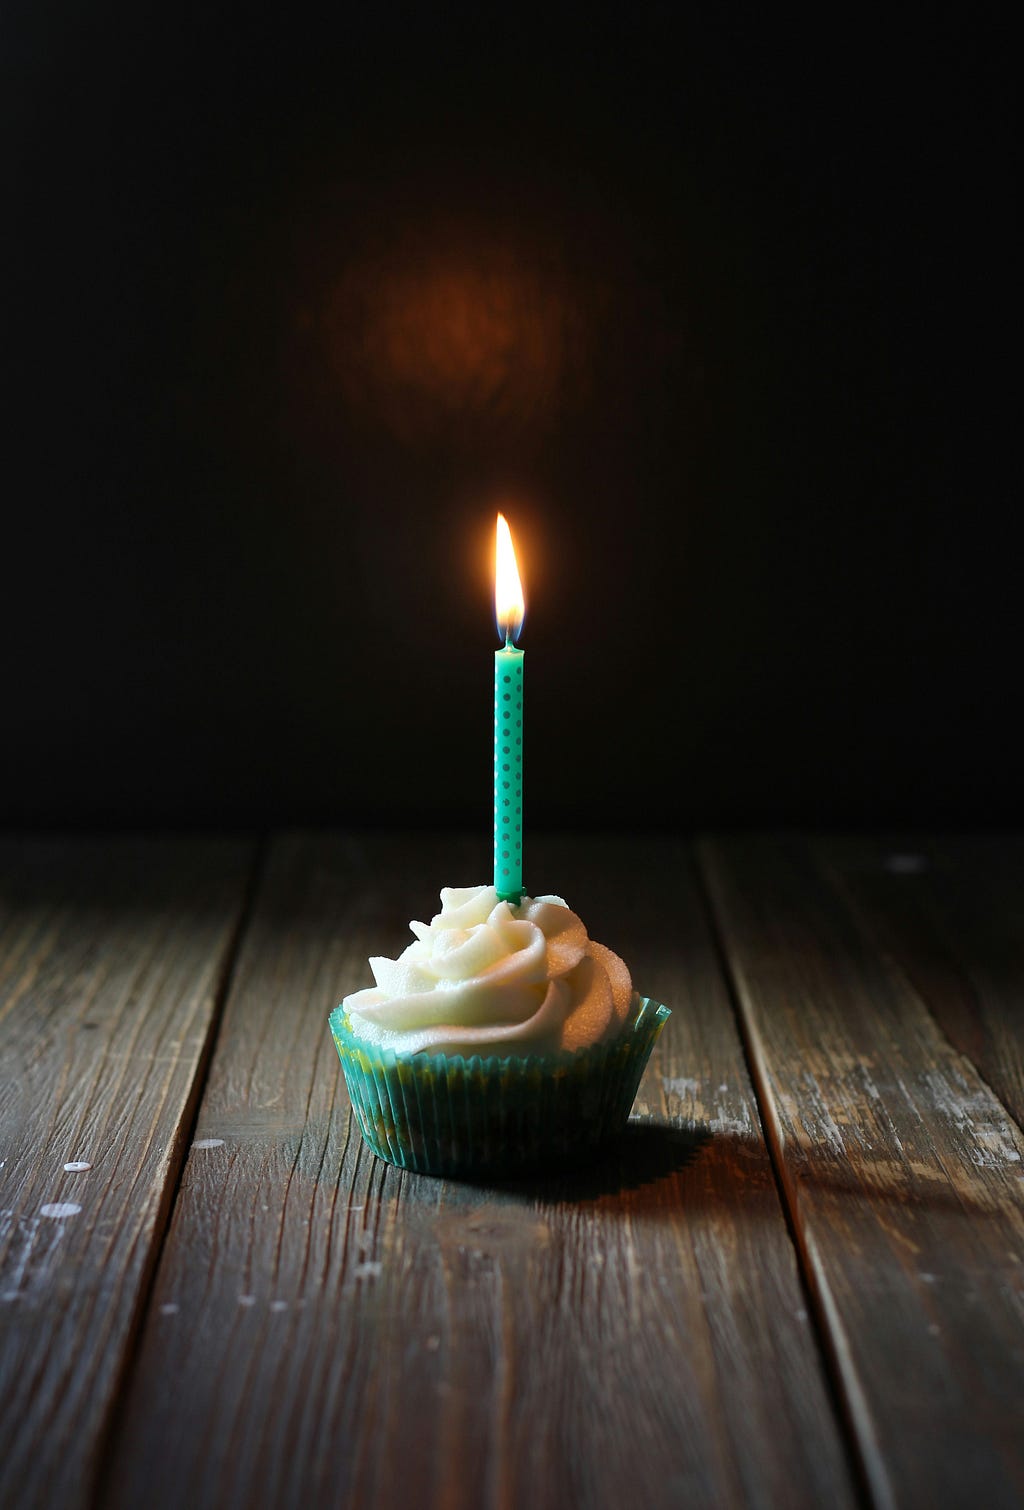 A single turquoise candle on top of a cupcake.